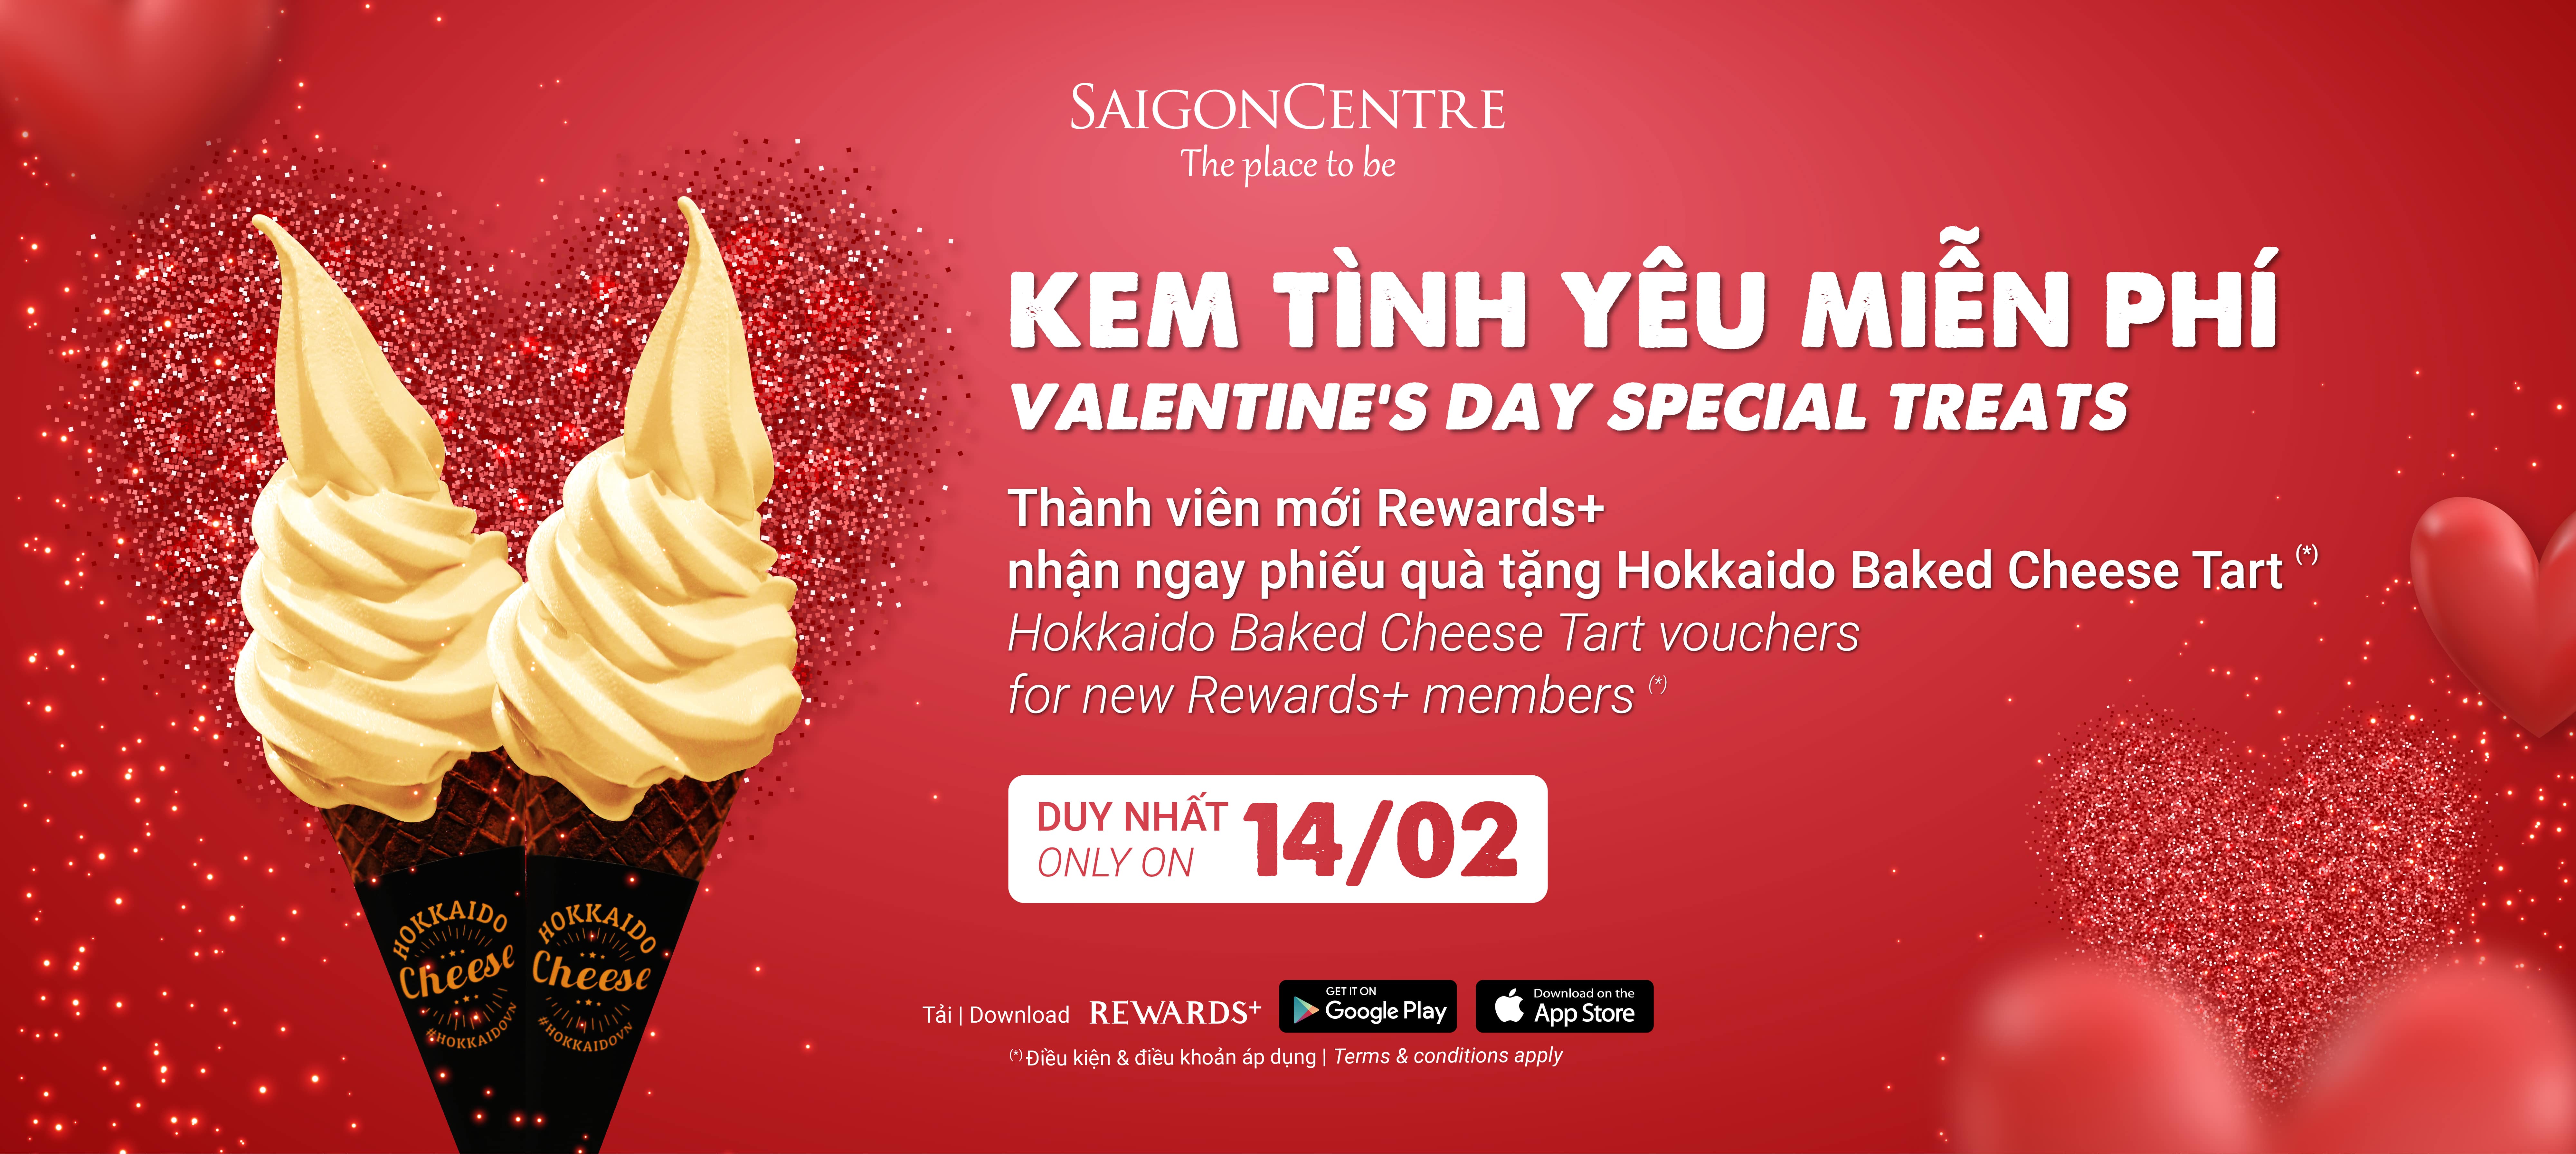 VALENTINE’S DAY SPECIAL TREATS FOR NEW REWARDS+ MEMBERS